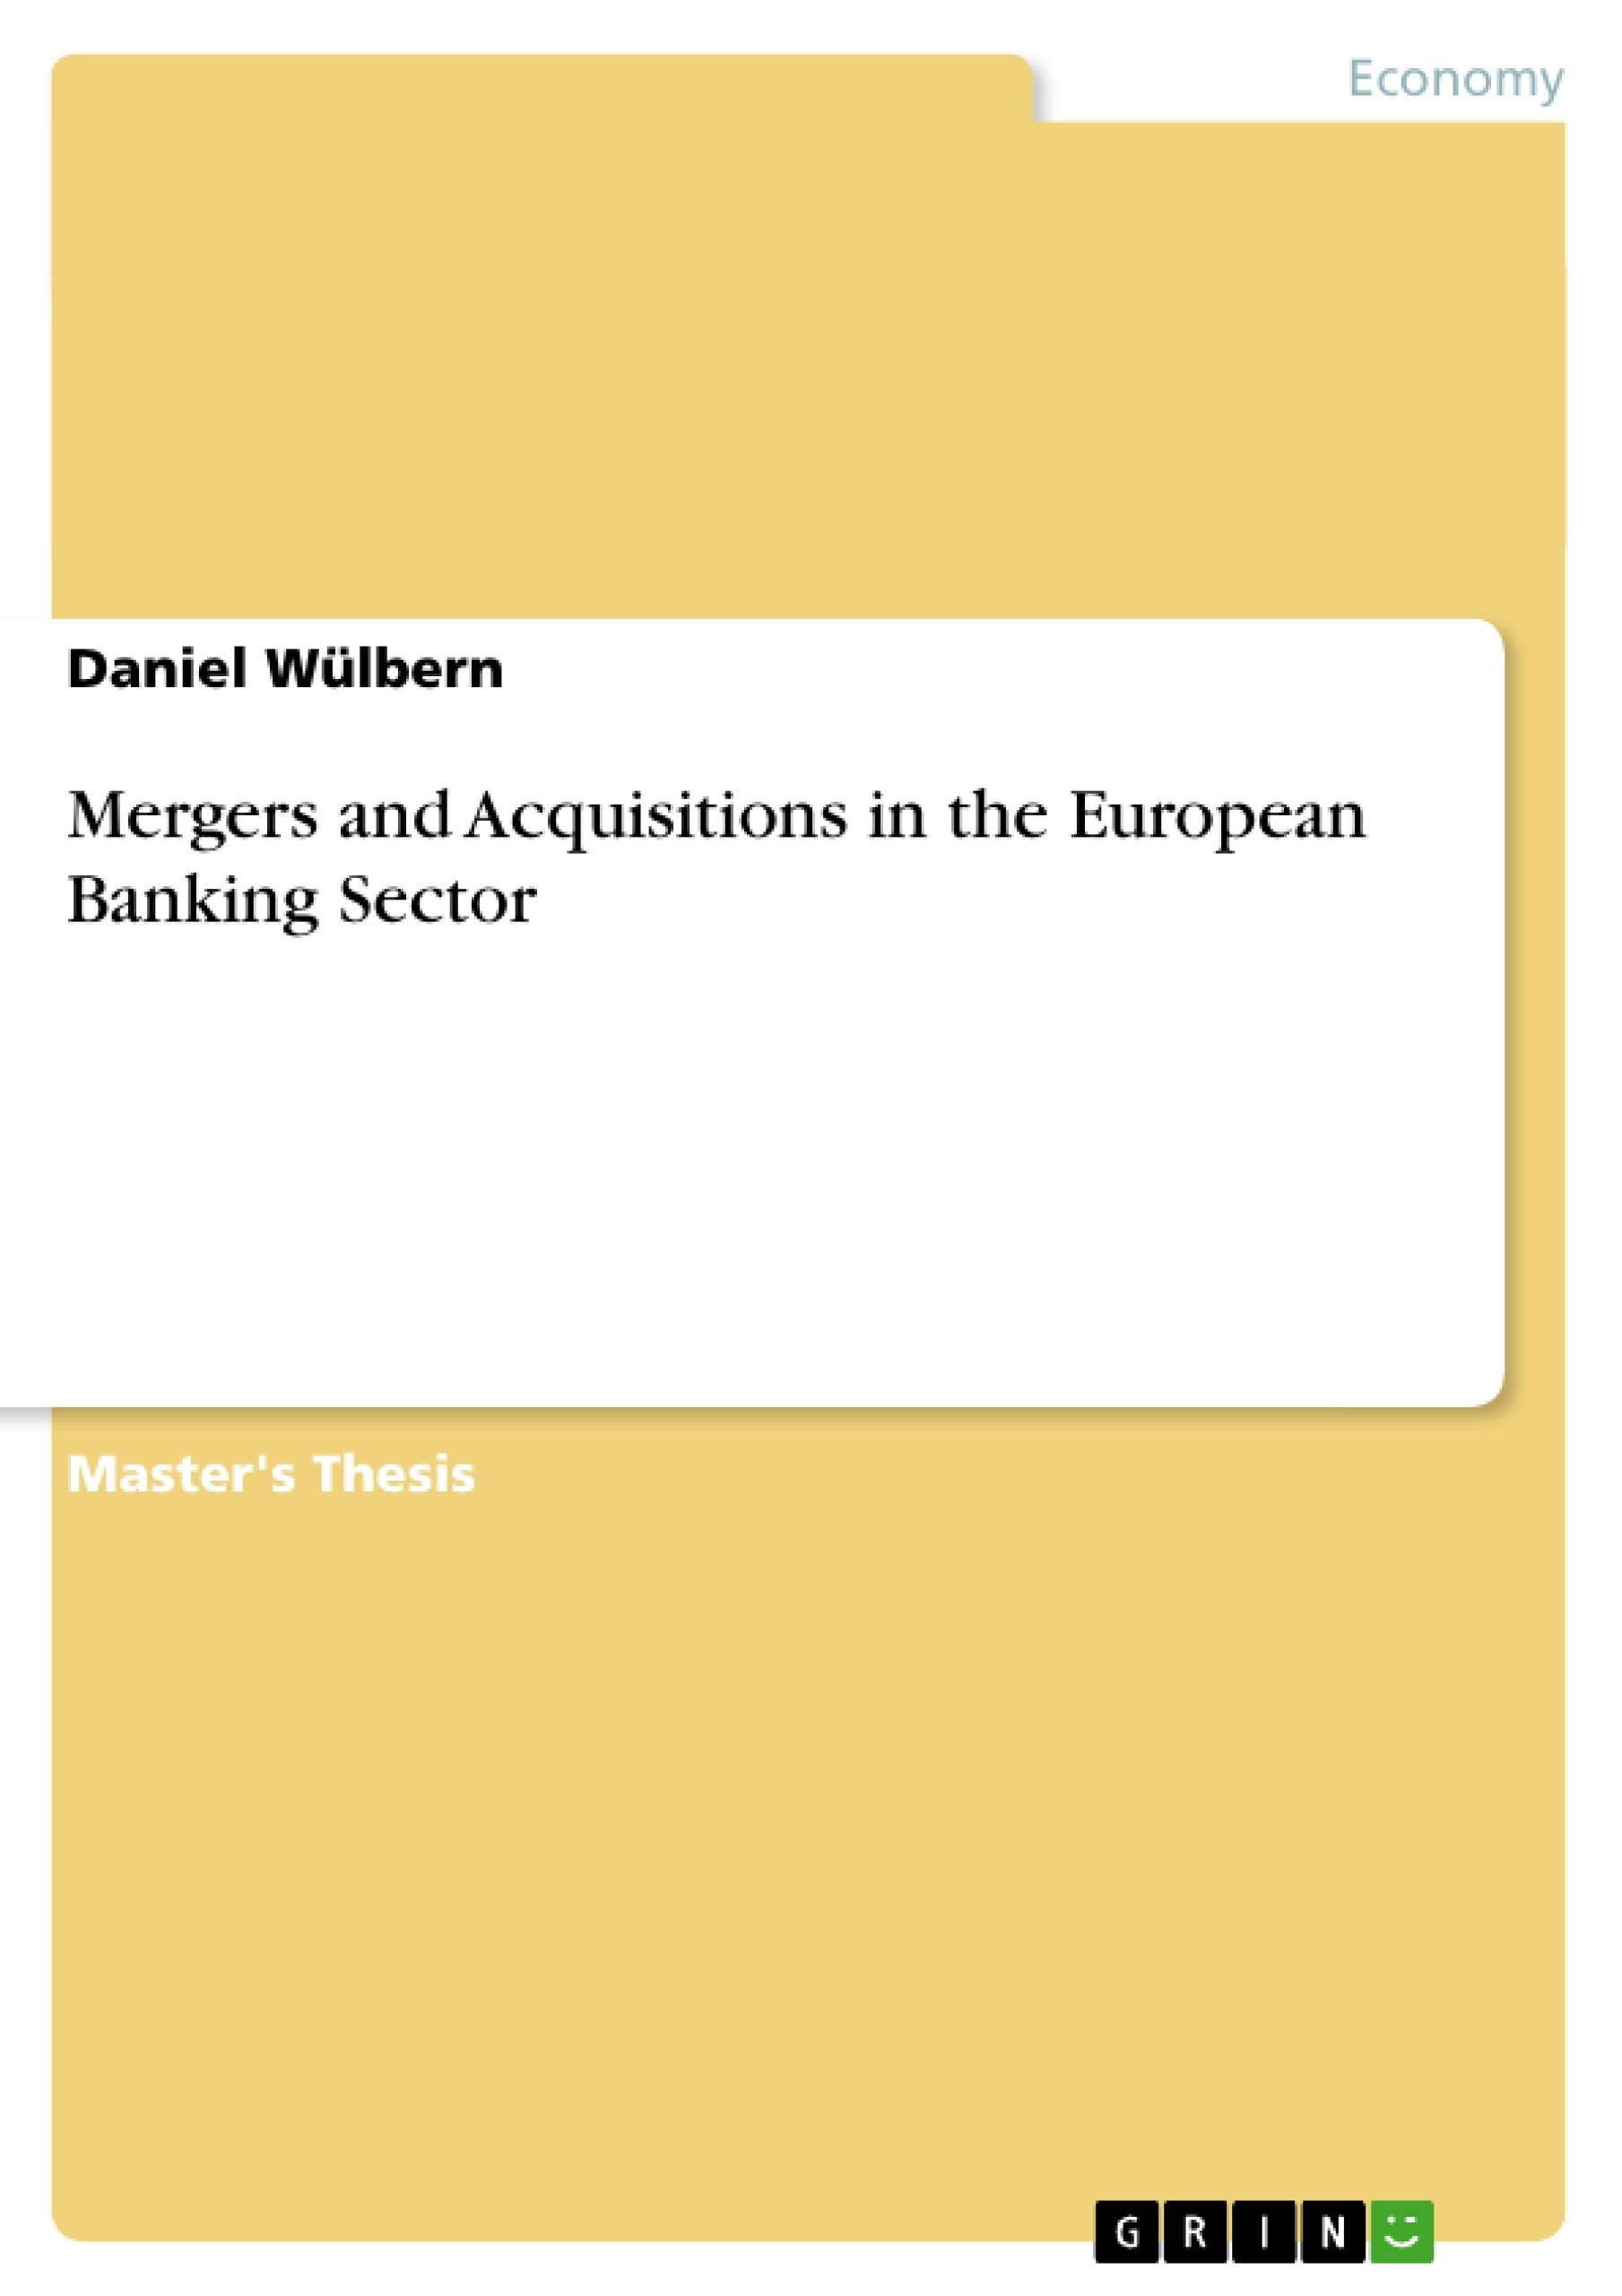 Título: Mergers and Acquisitions in the European Banking Sector